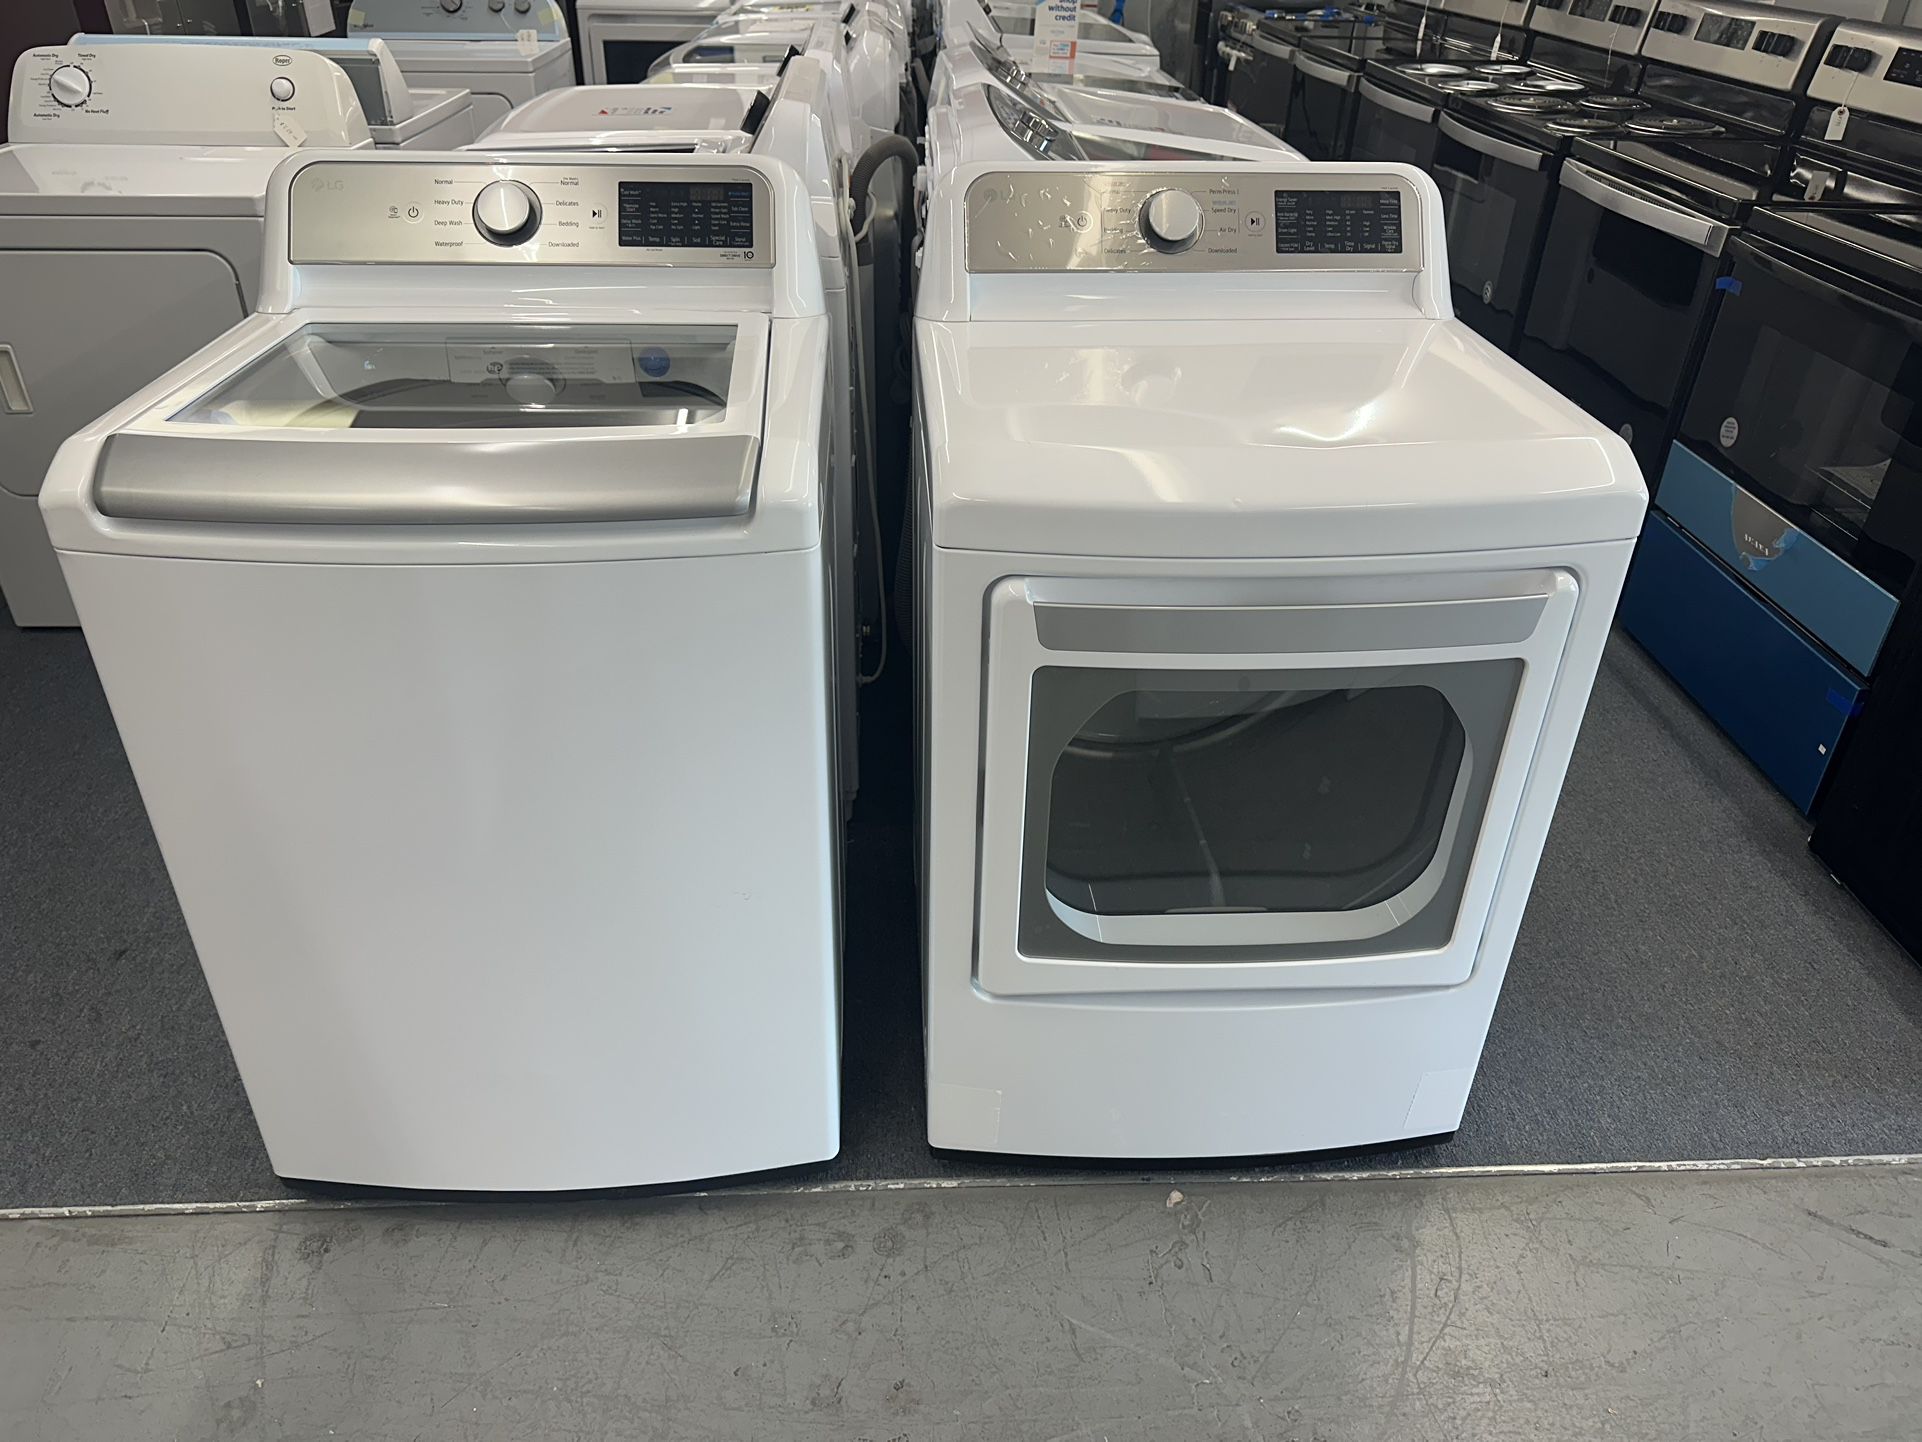 New Scratch And Dent Lg Washer And Dryer Set 1 Year Warranty 